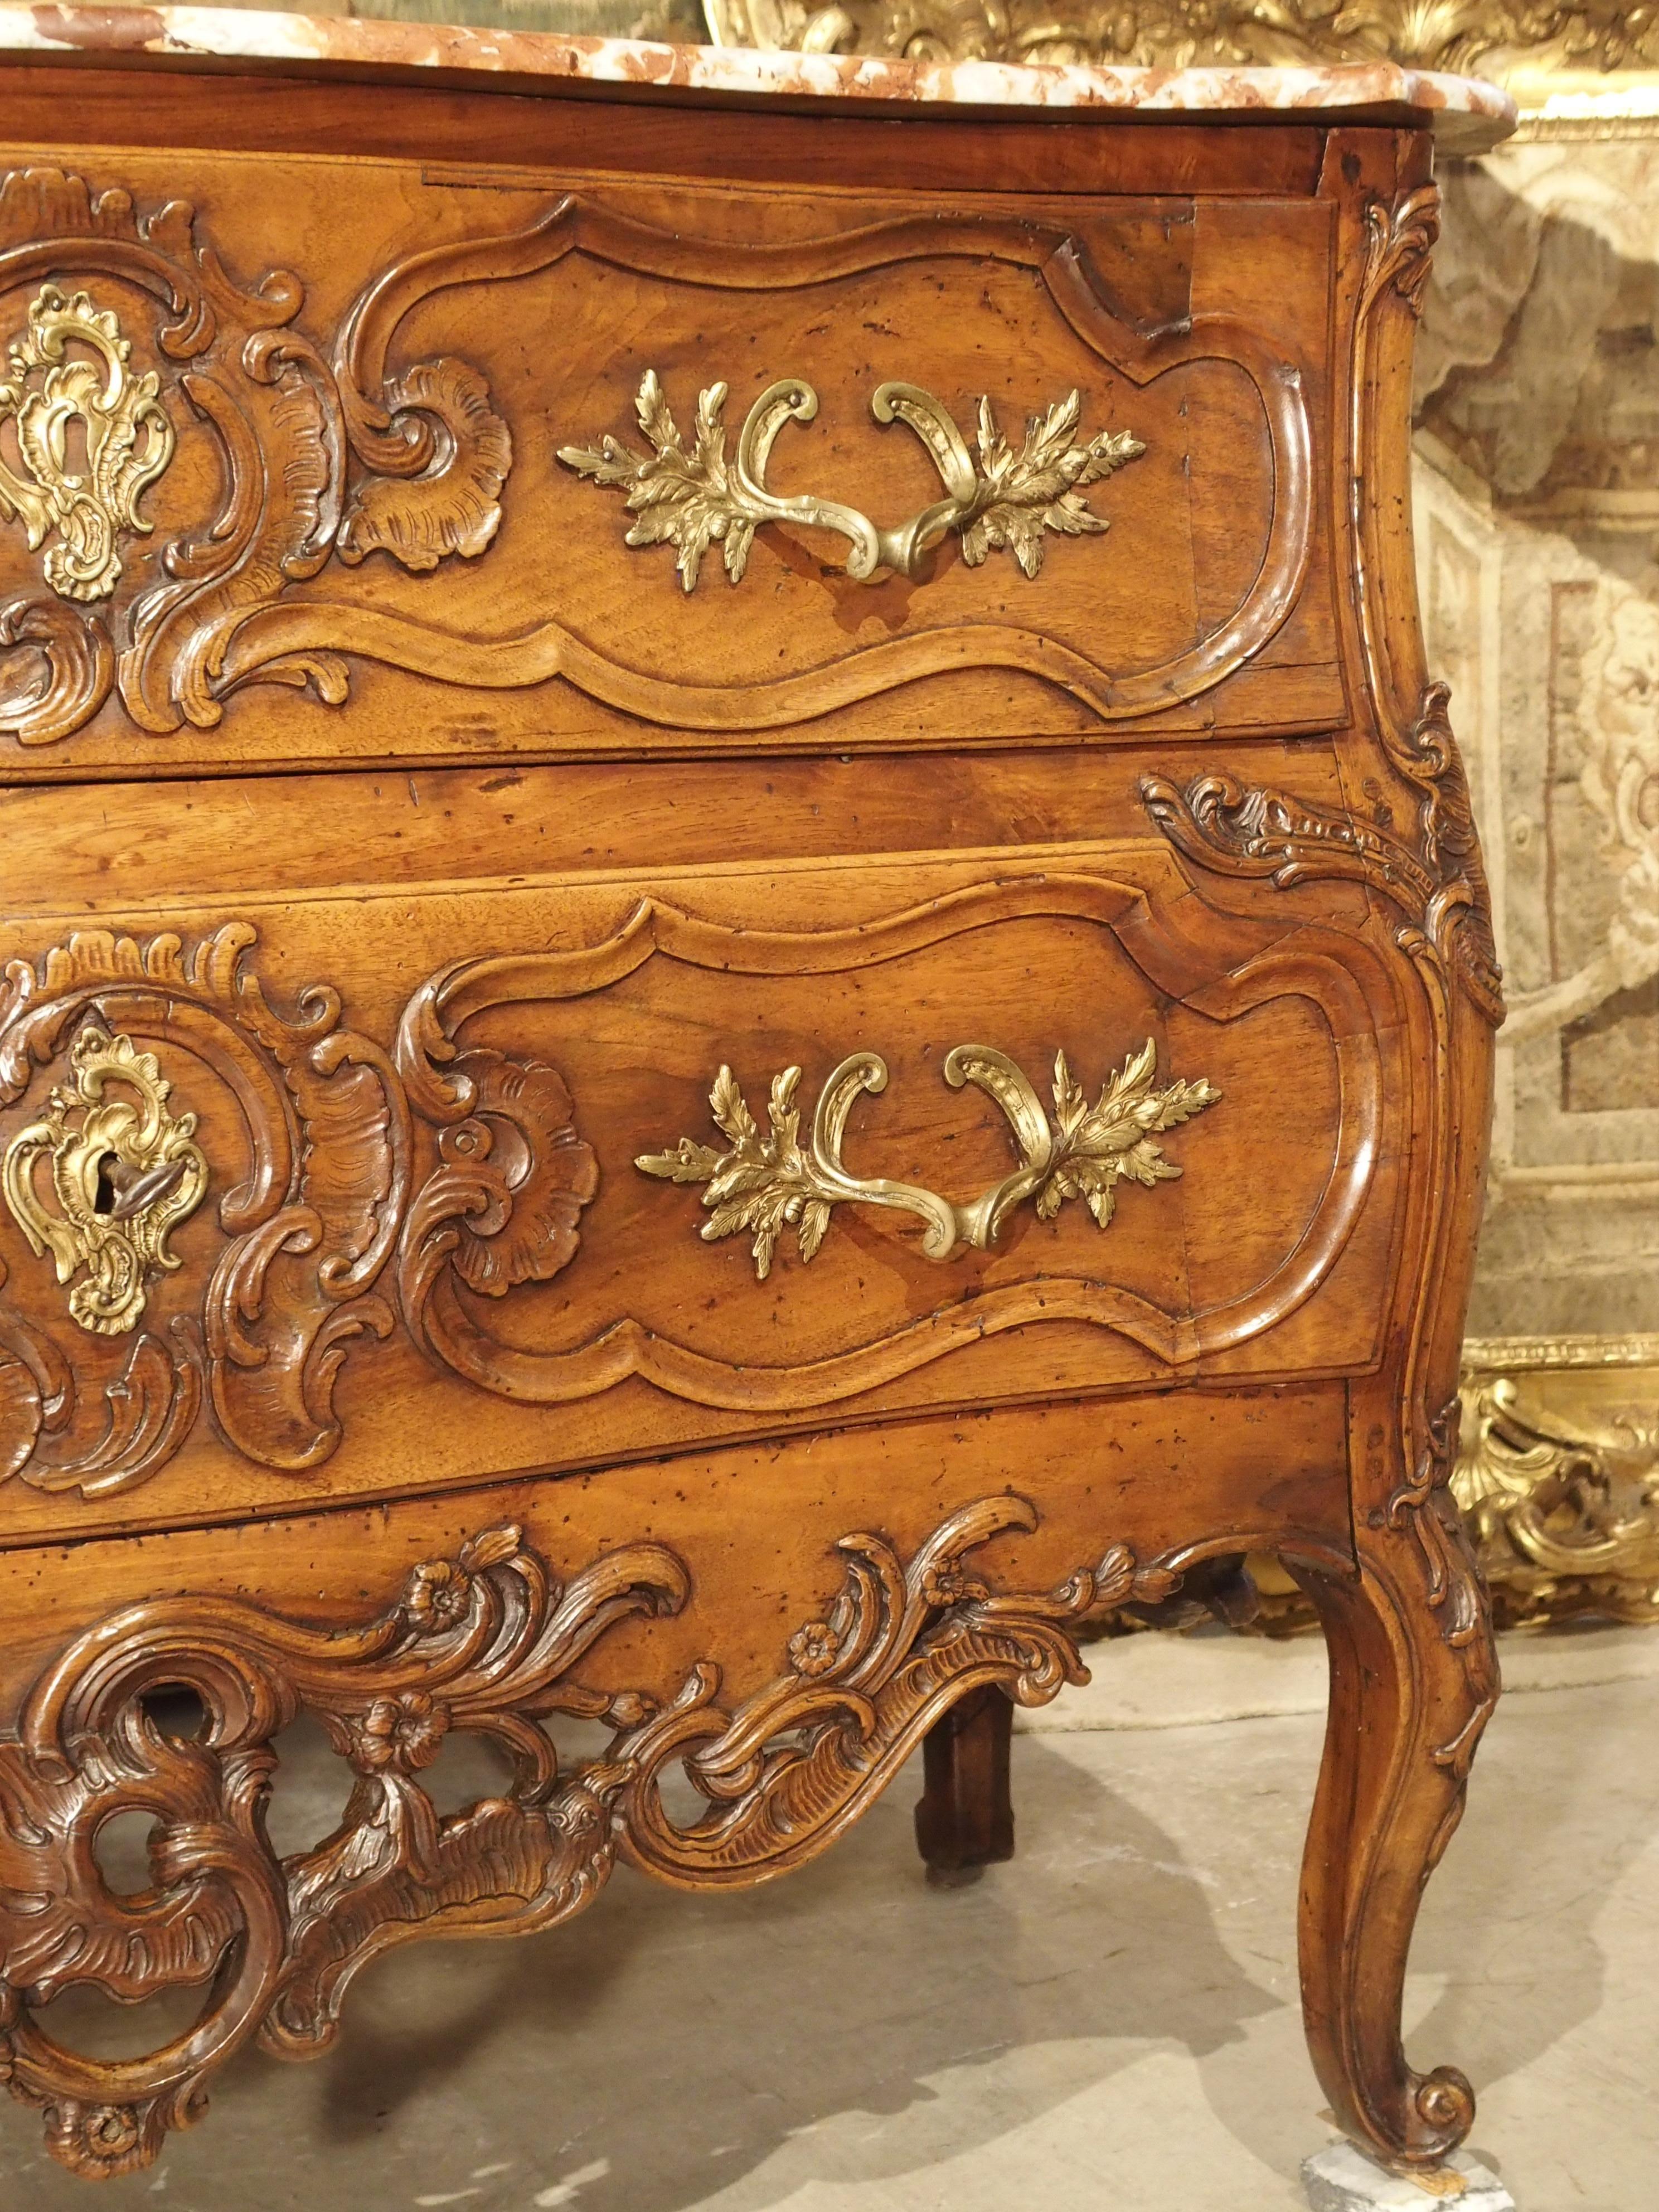 Marble Period Louis XV Walnut Wood Commode ‘Sauteuse’ from Nimes, France, circa 1740